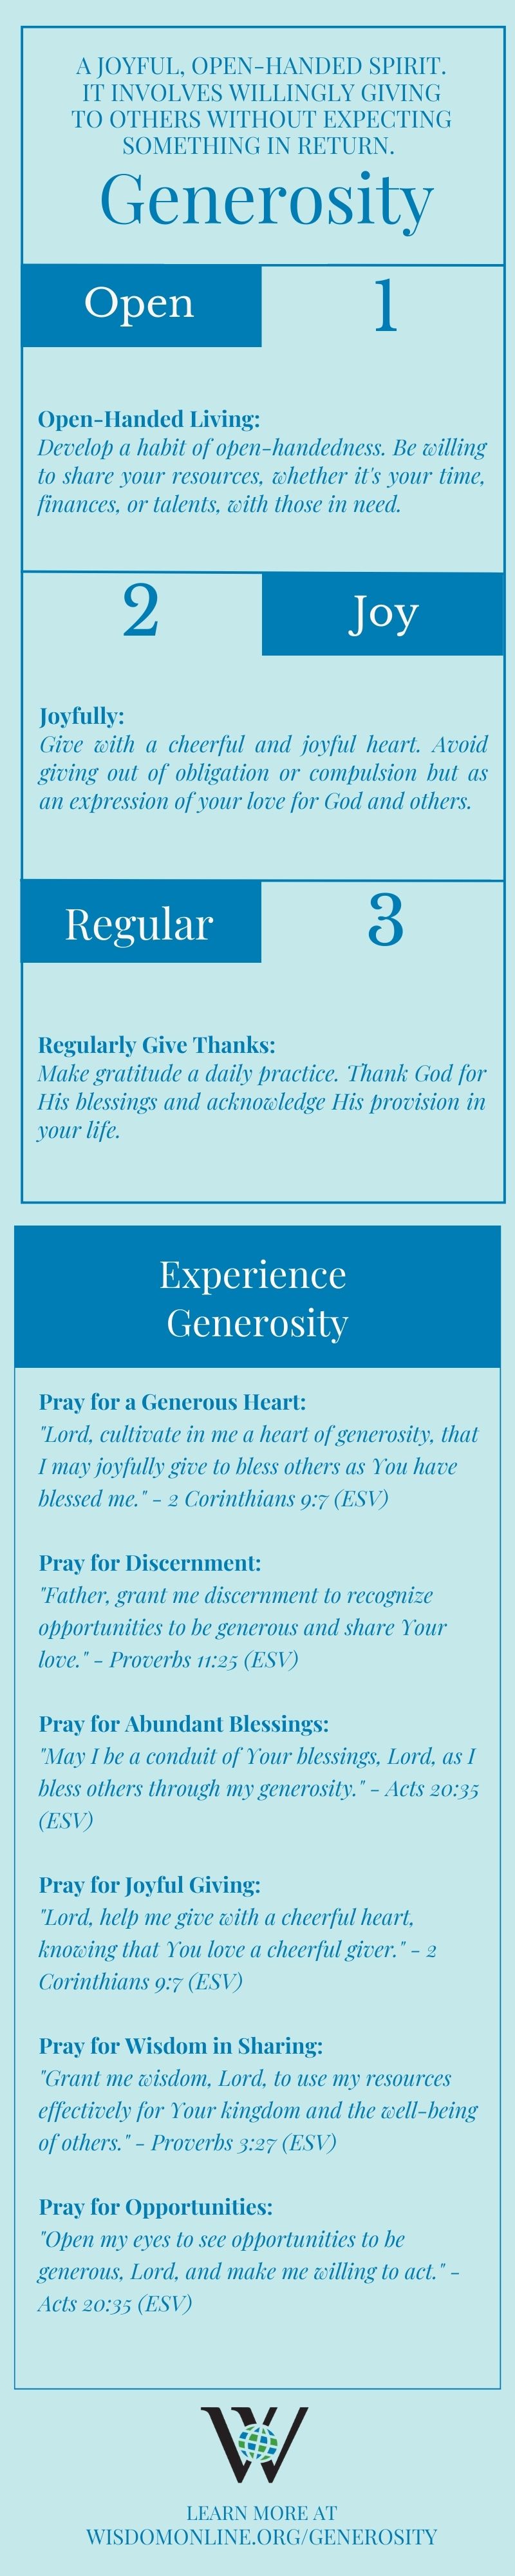 Infographic on the biblical quality of generosity.